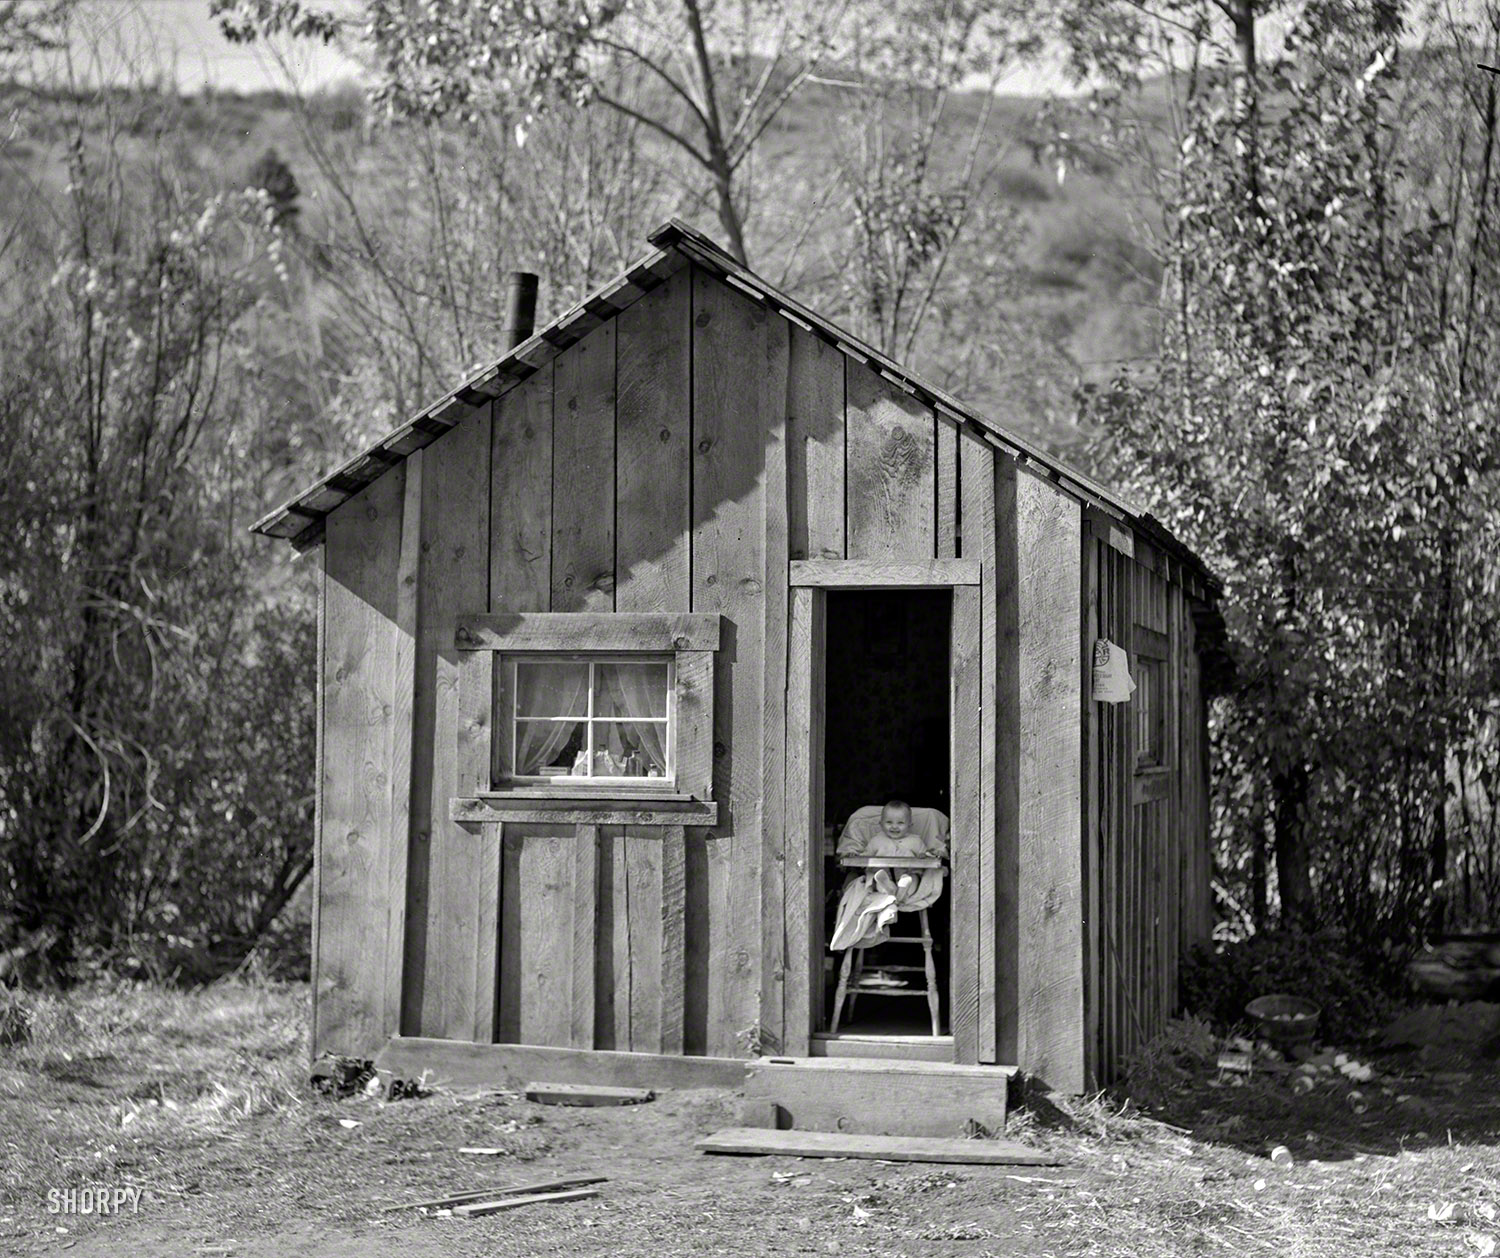 October 1939. "Home of one member of Ola self-help sawmill co-op, Gem County, Idaho. 'She likes to sit in the door and watch the geese'." Seen earlier here. Photo by Dorothea Lange for the Farm Security Administration. View full size.